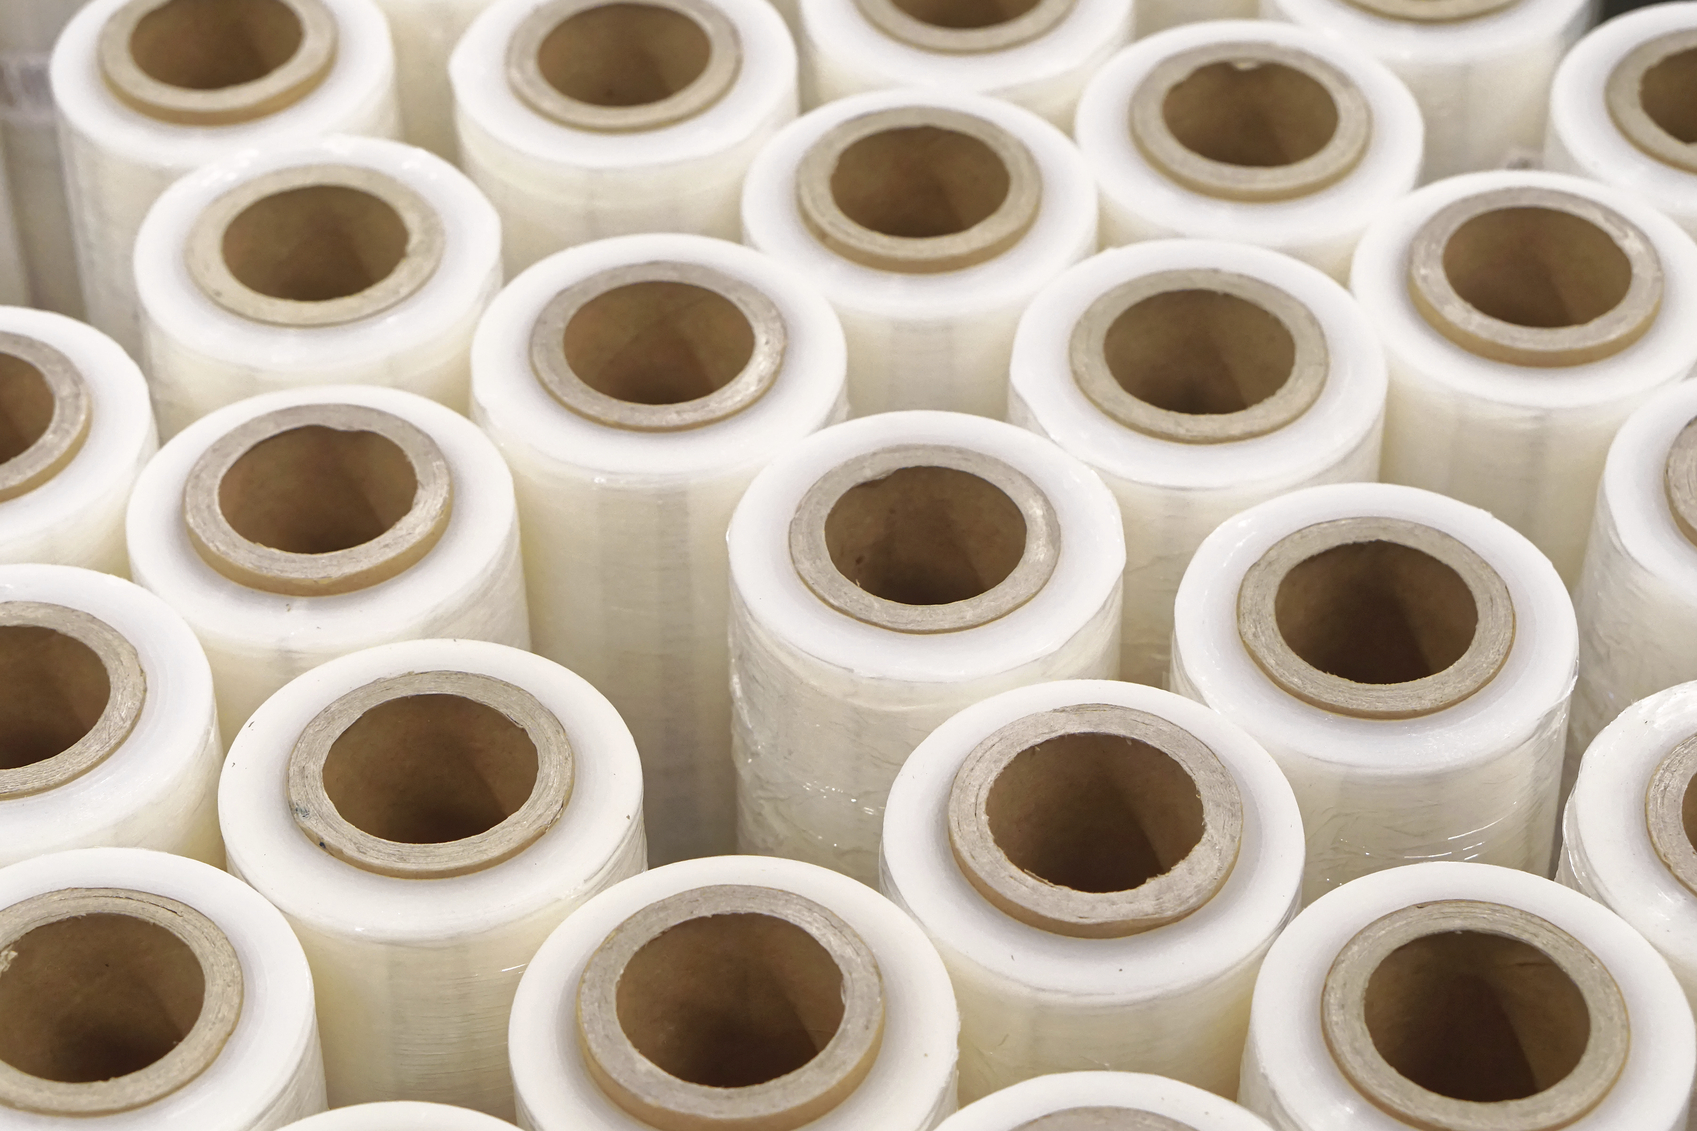 Stretch wrap or stretch film is an important tool in packaging. Here are the different kinds and different uses of stretch film.